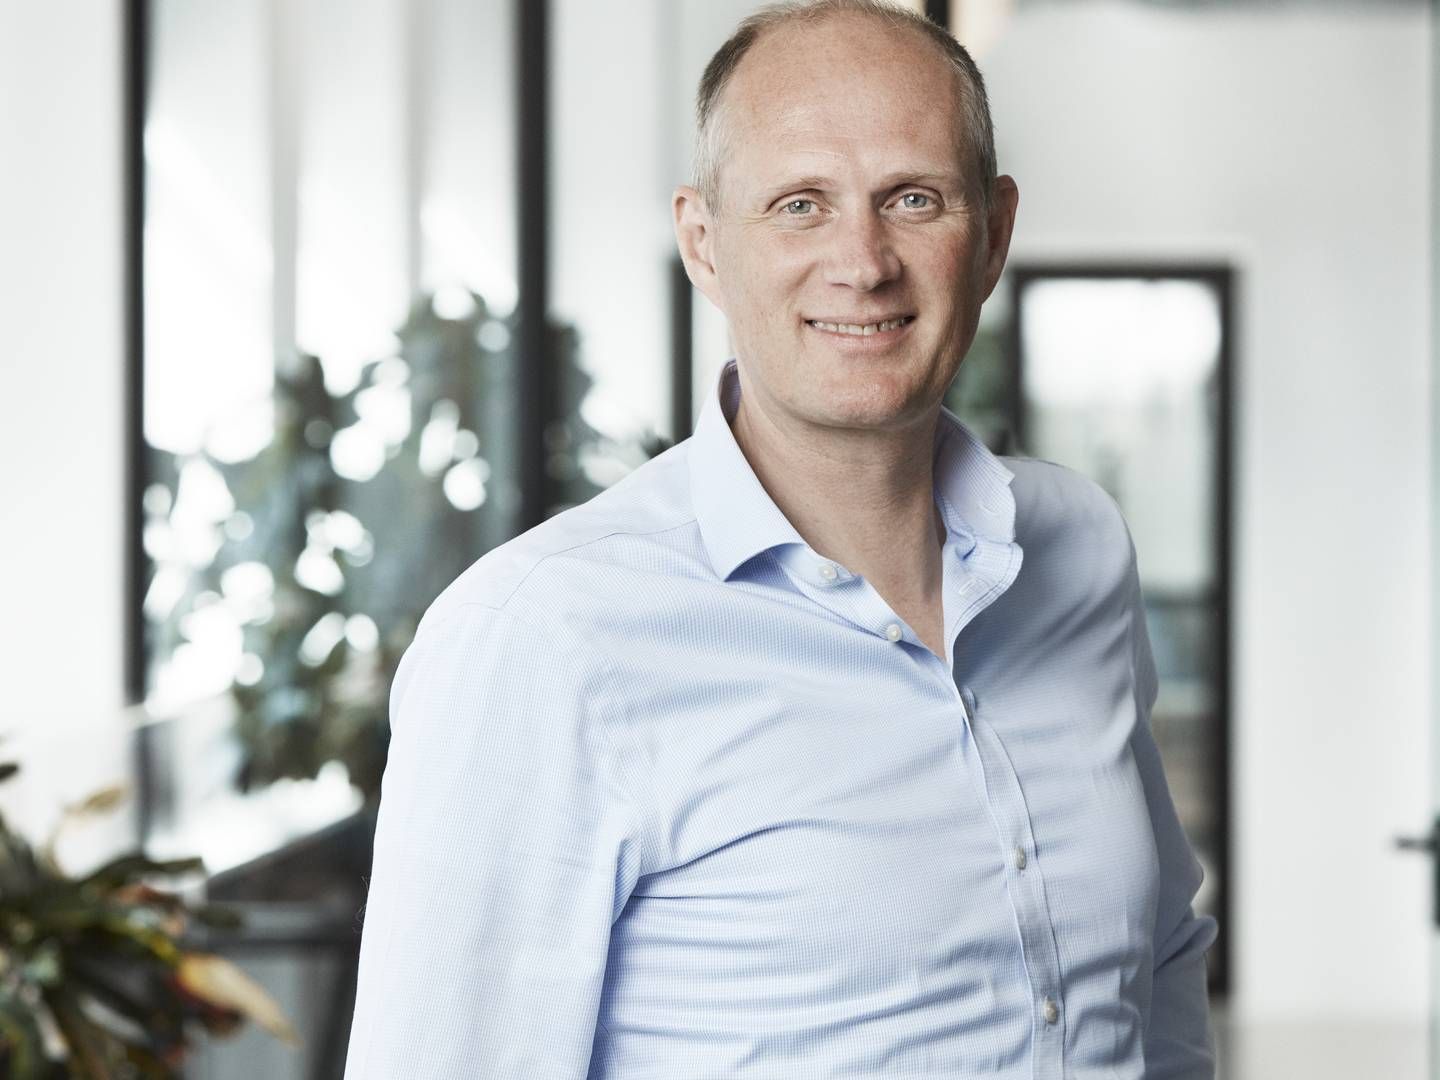 Søren Christian Meyer has made the switch to Maersk Tankers' new digital venture Zeronorth. Prior to this he headed the shipping company's fleet. | Photo: Maersk Tankers